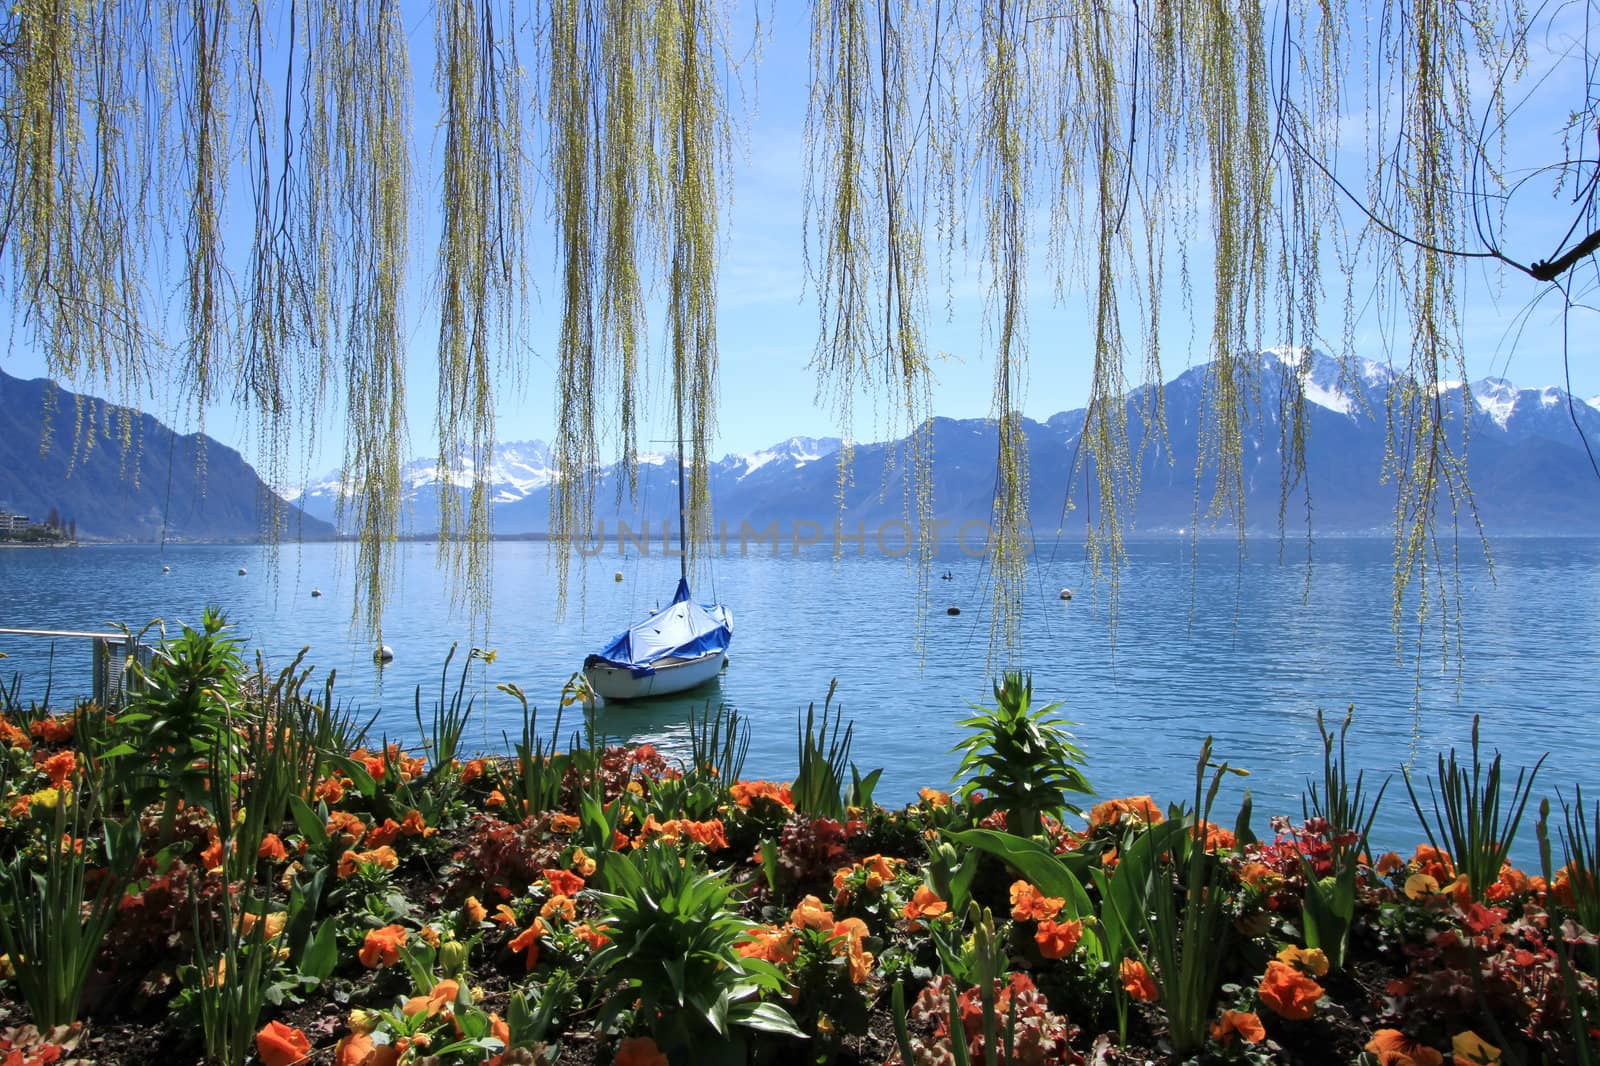 Colorful flowers at springtime at Geneva lake, Montreux, Switzerland. See little boat and Alps mountains in the background.